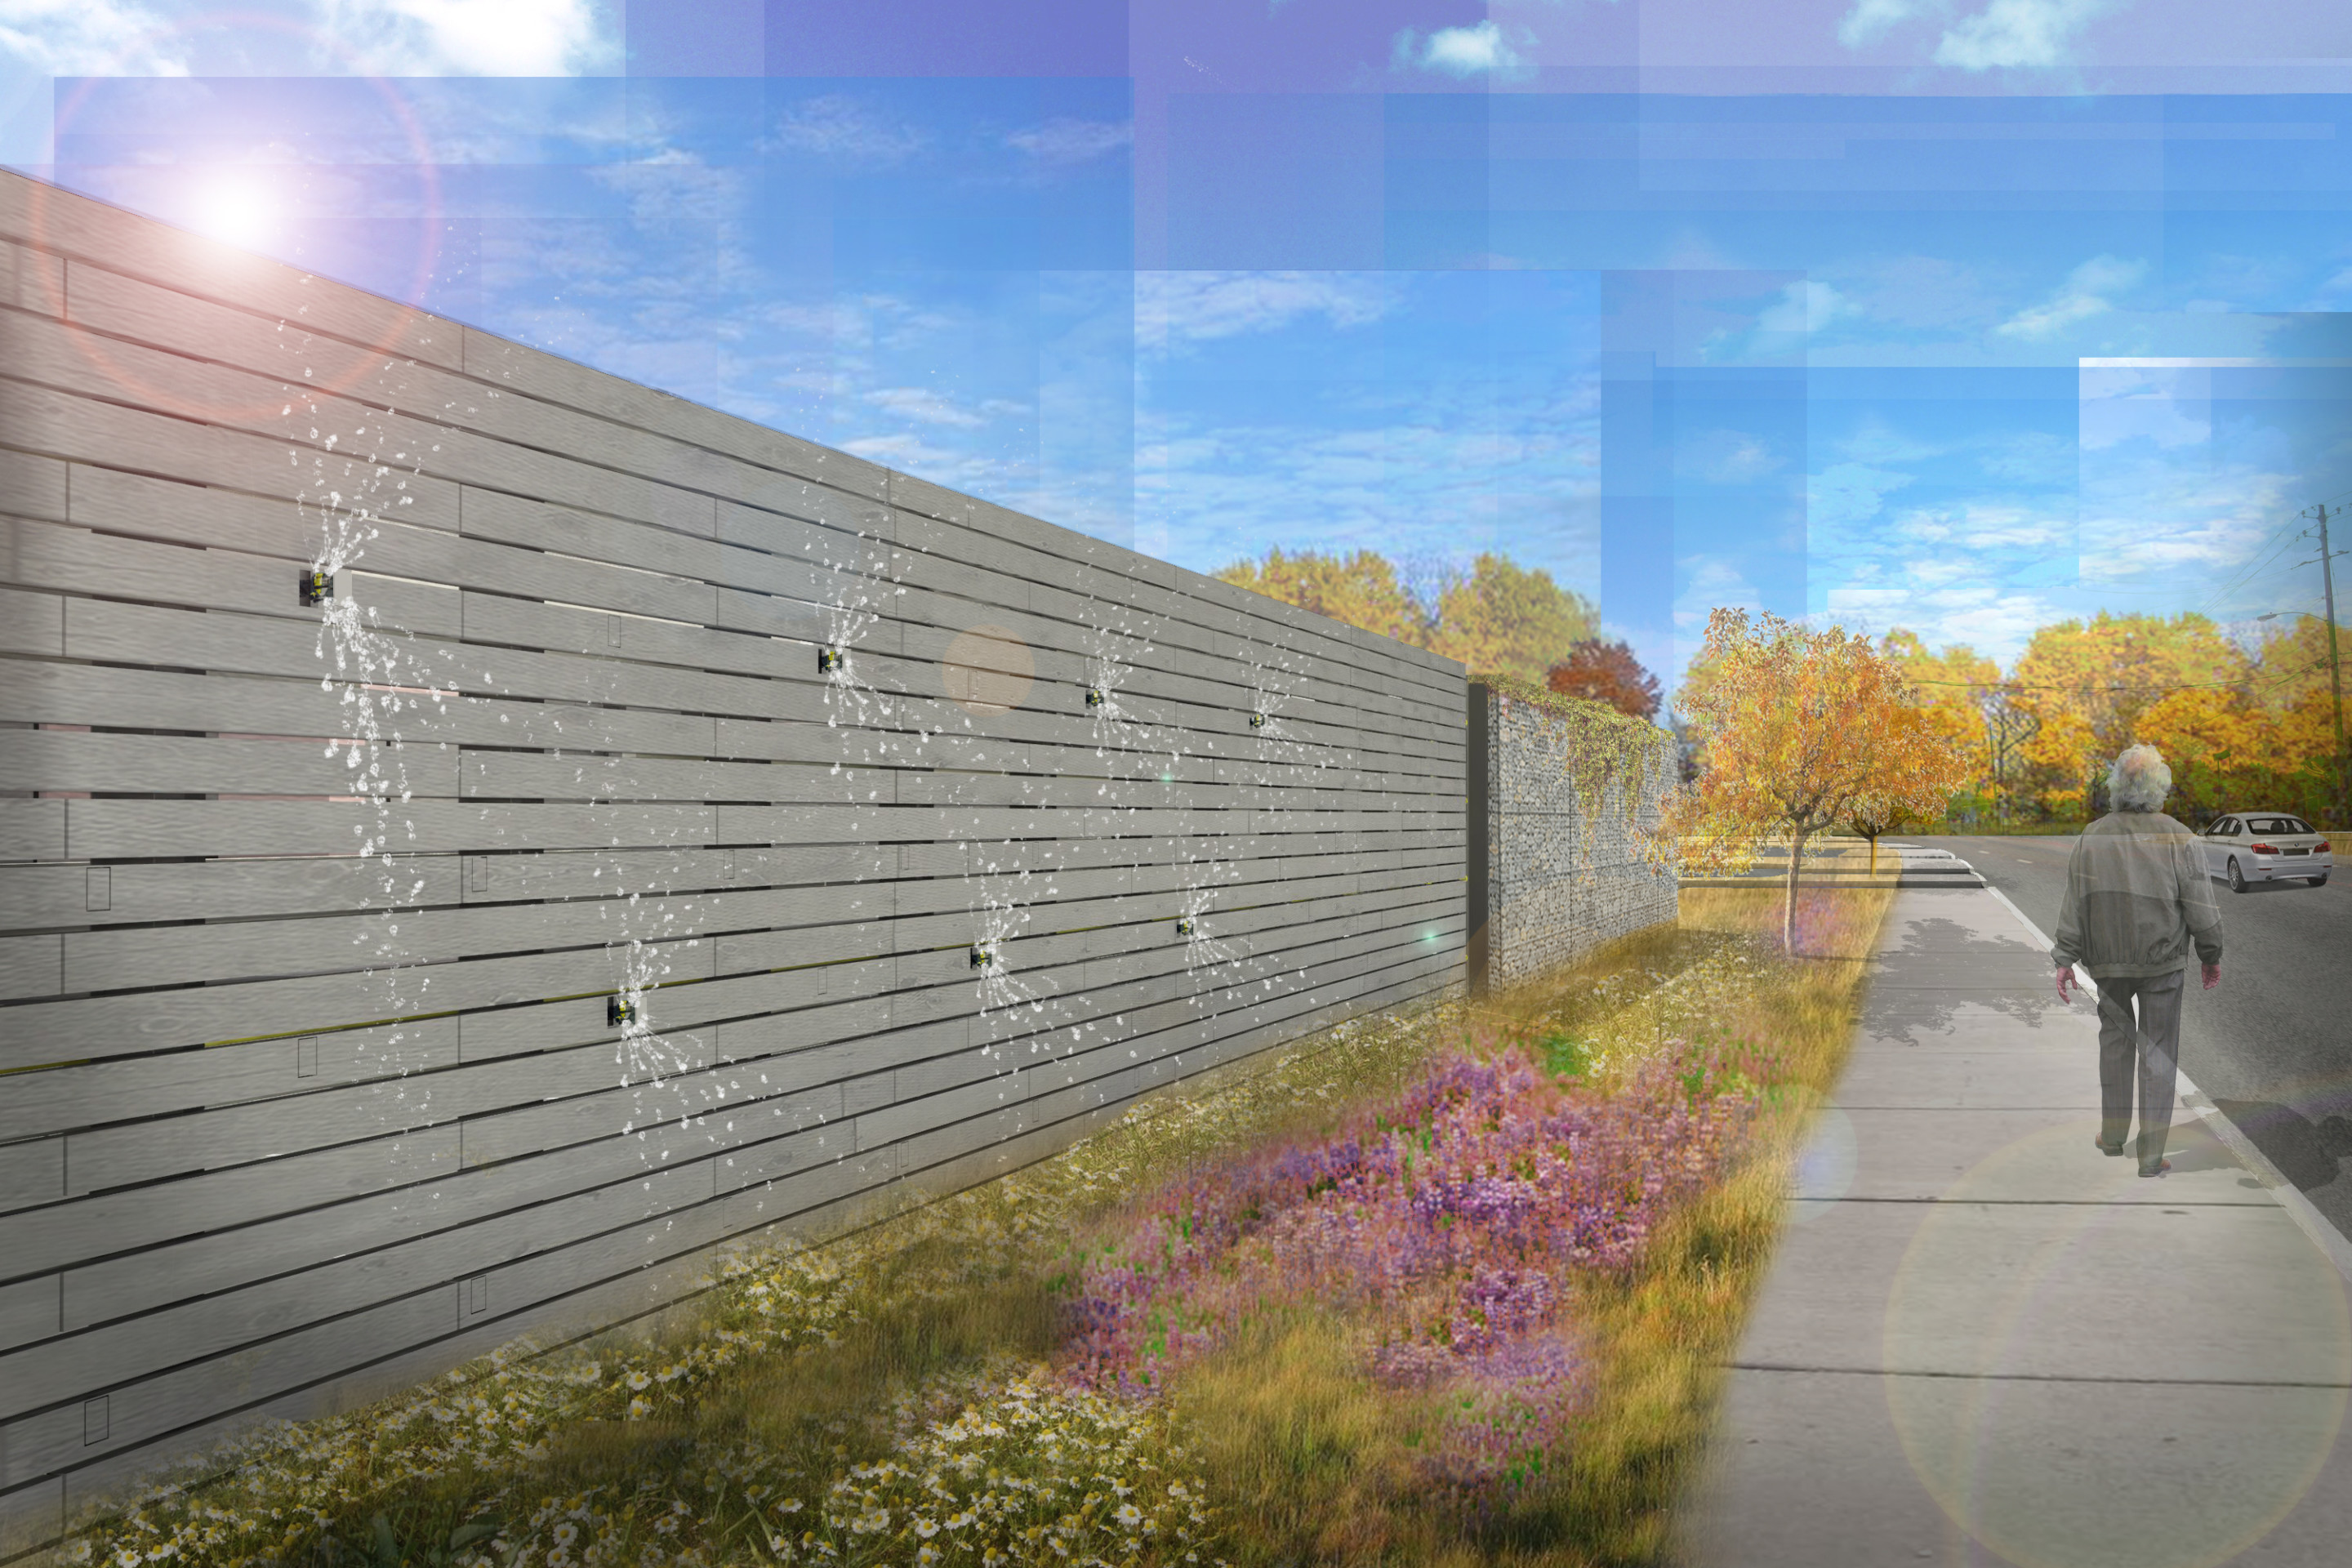 rendering of a fence with sprinklers